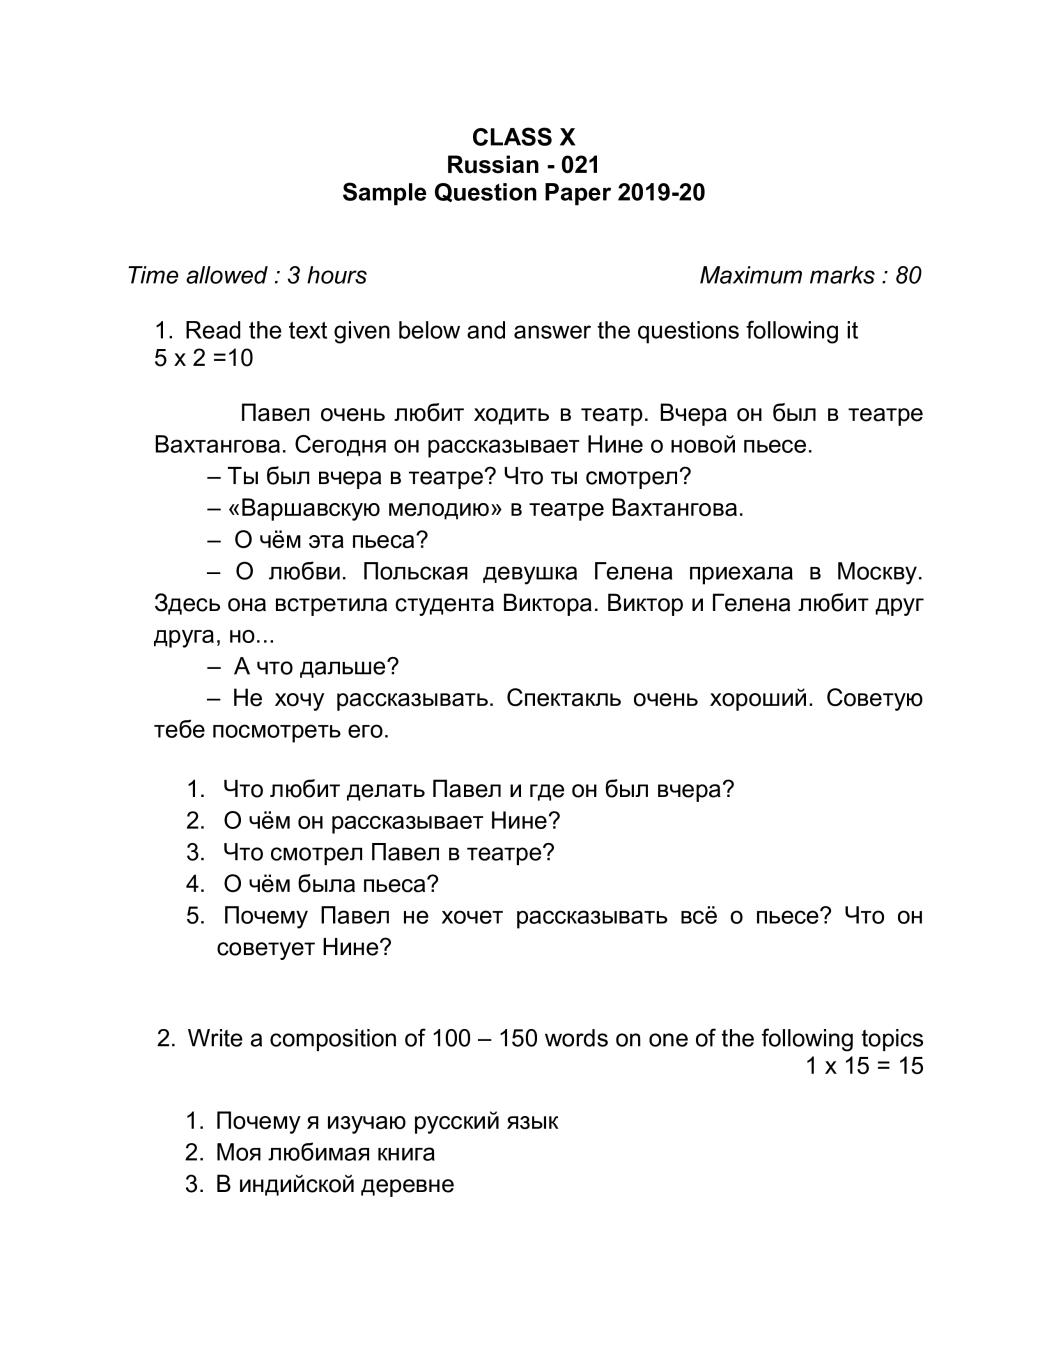 CBSE Class 10 Sample Paper 2020 for Russian - Page 1